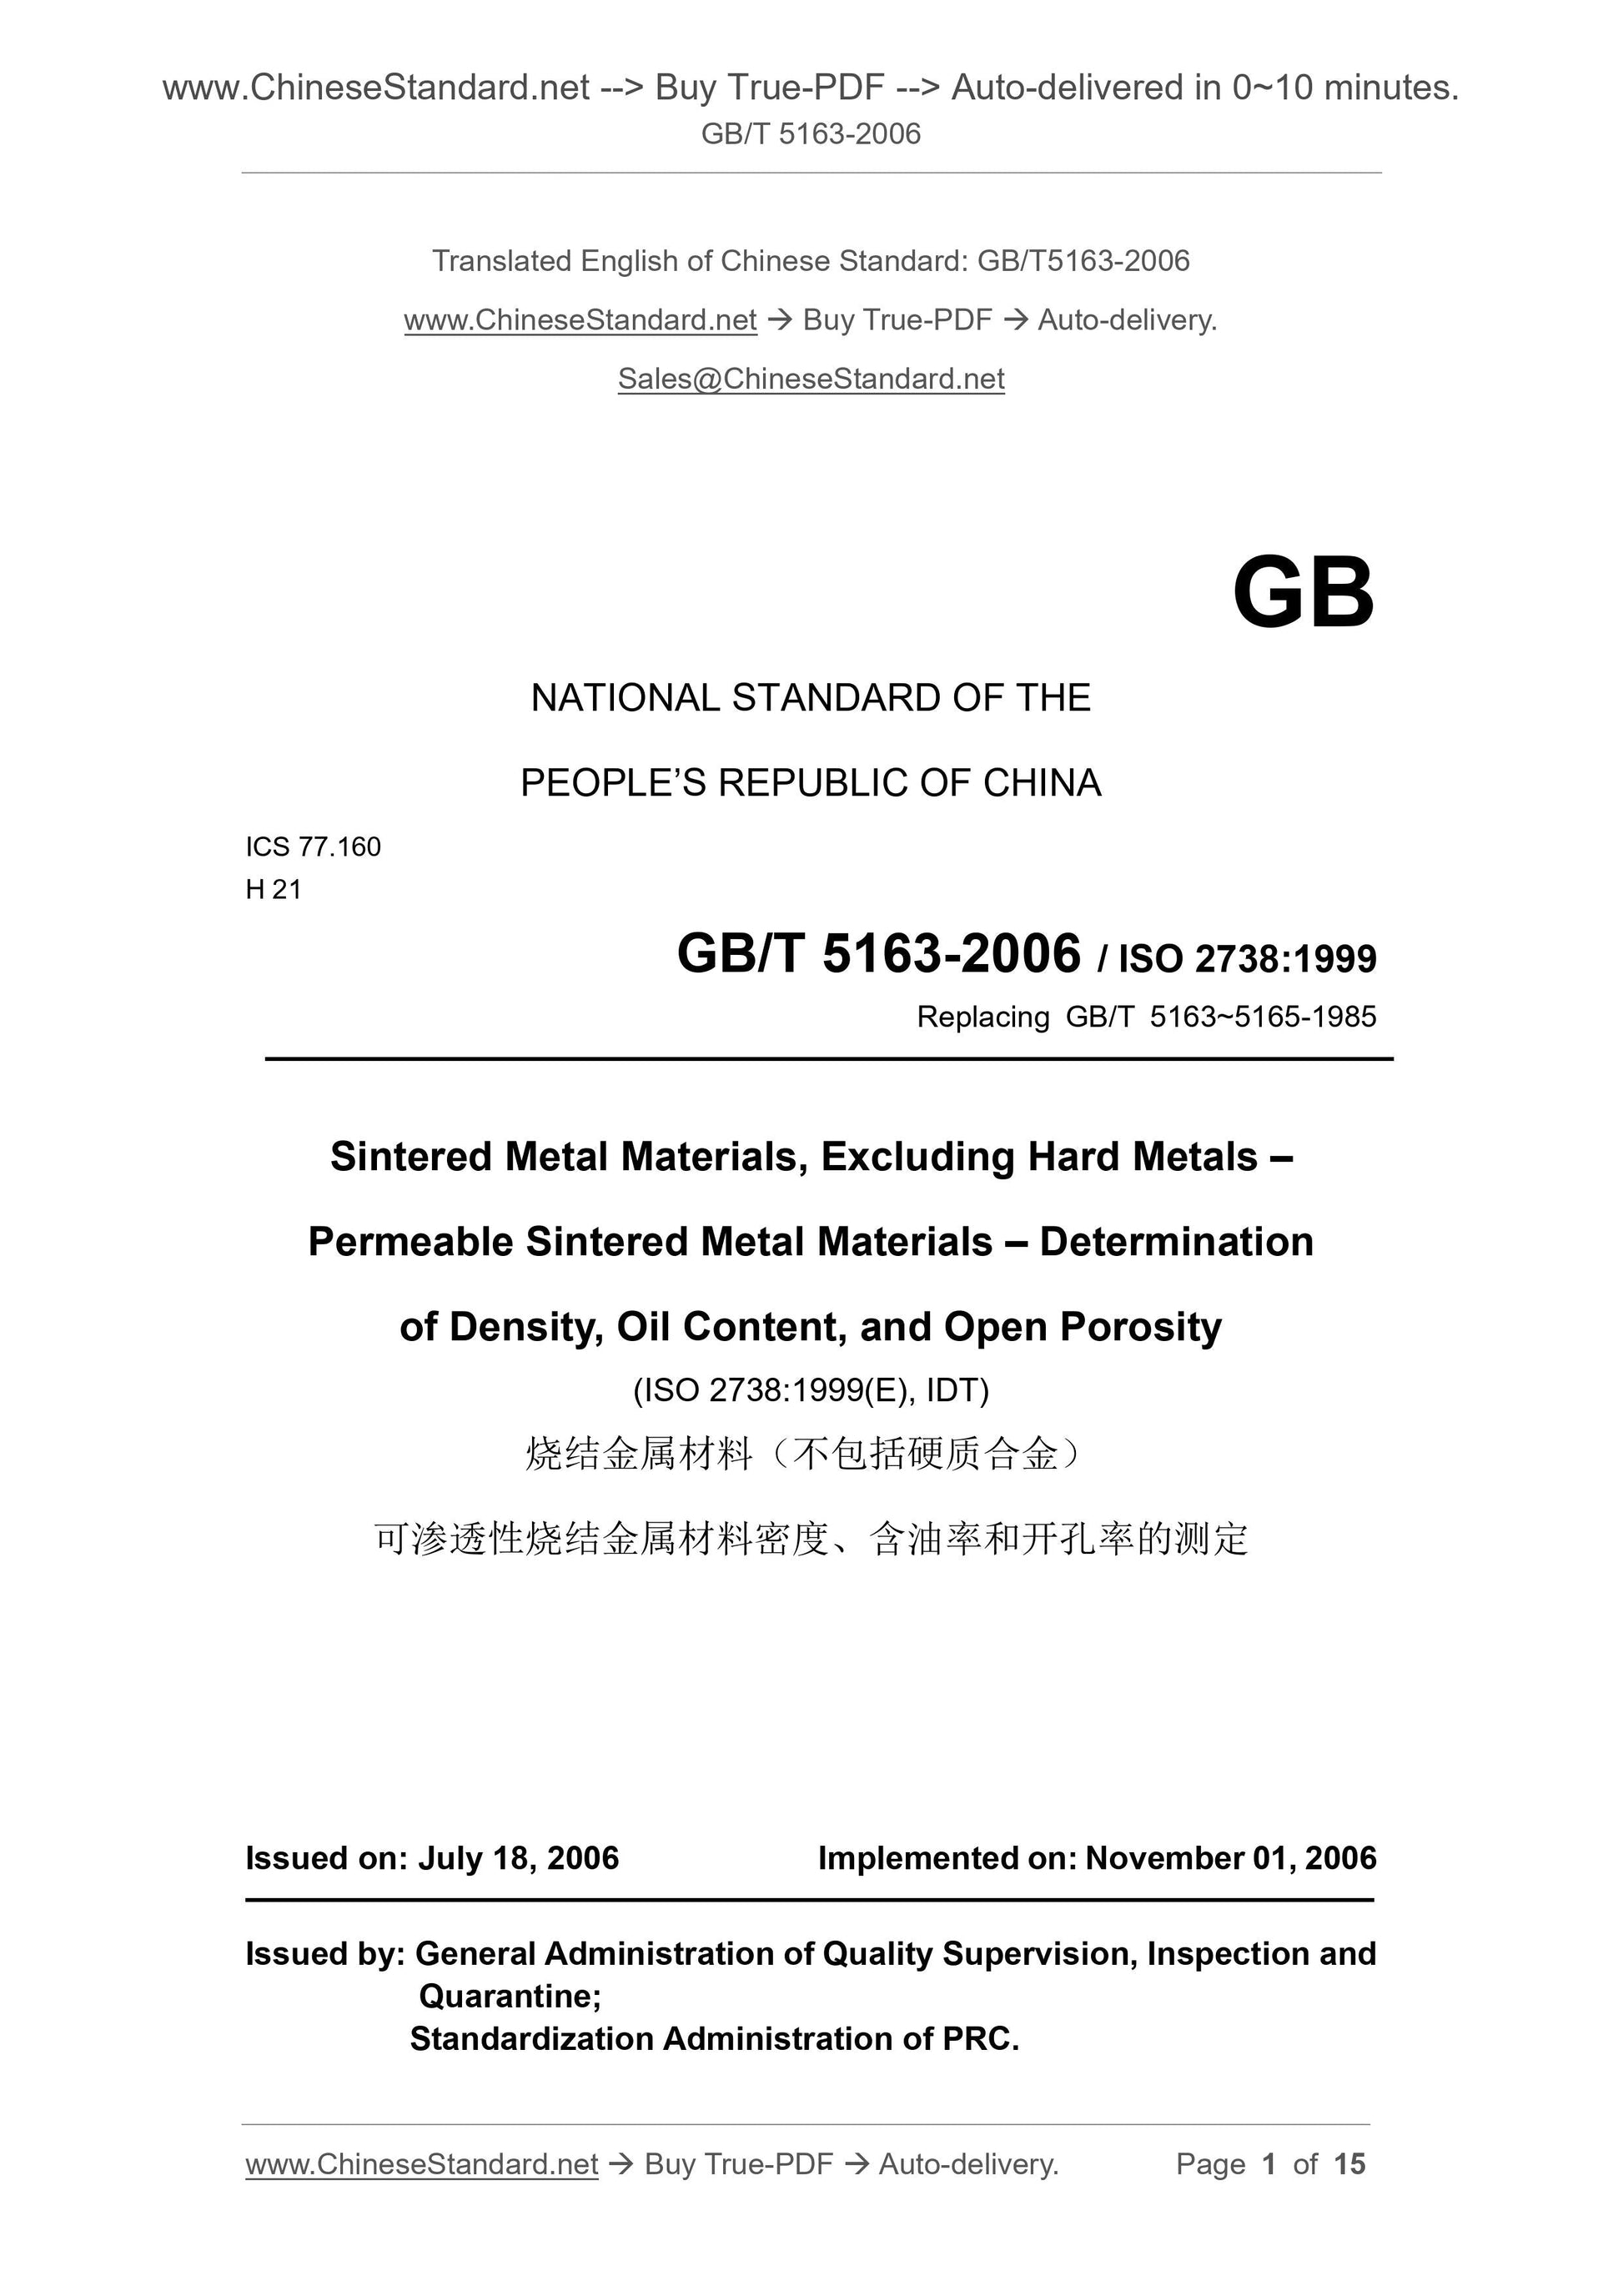 GB/T 5163-2006 Page 1